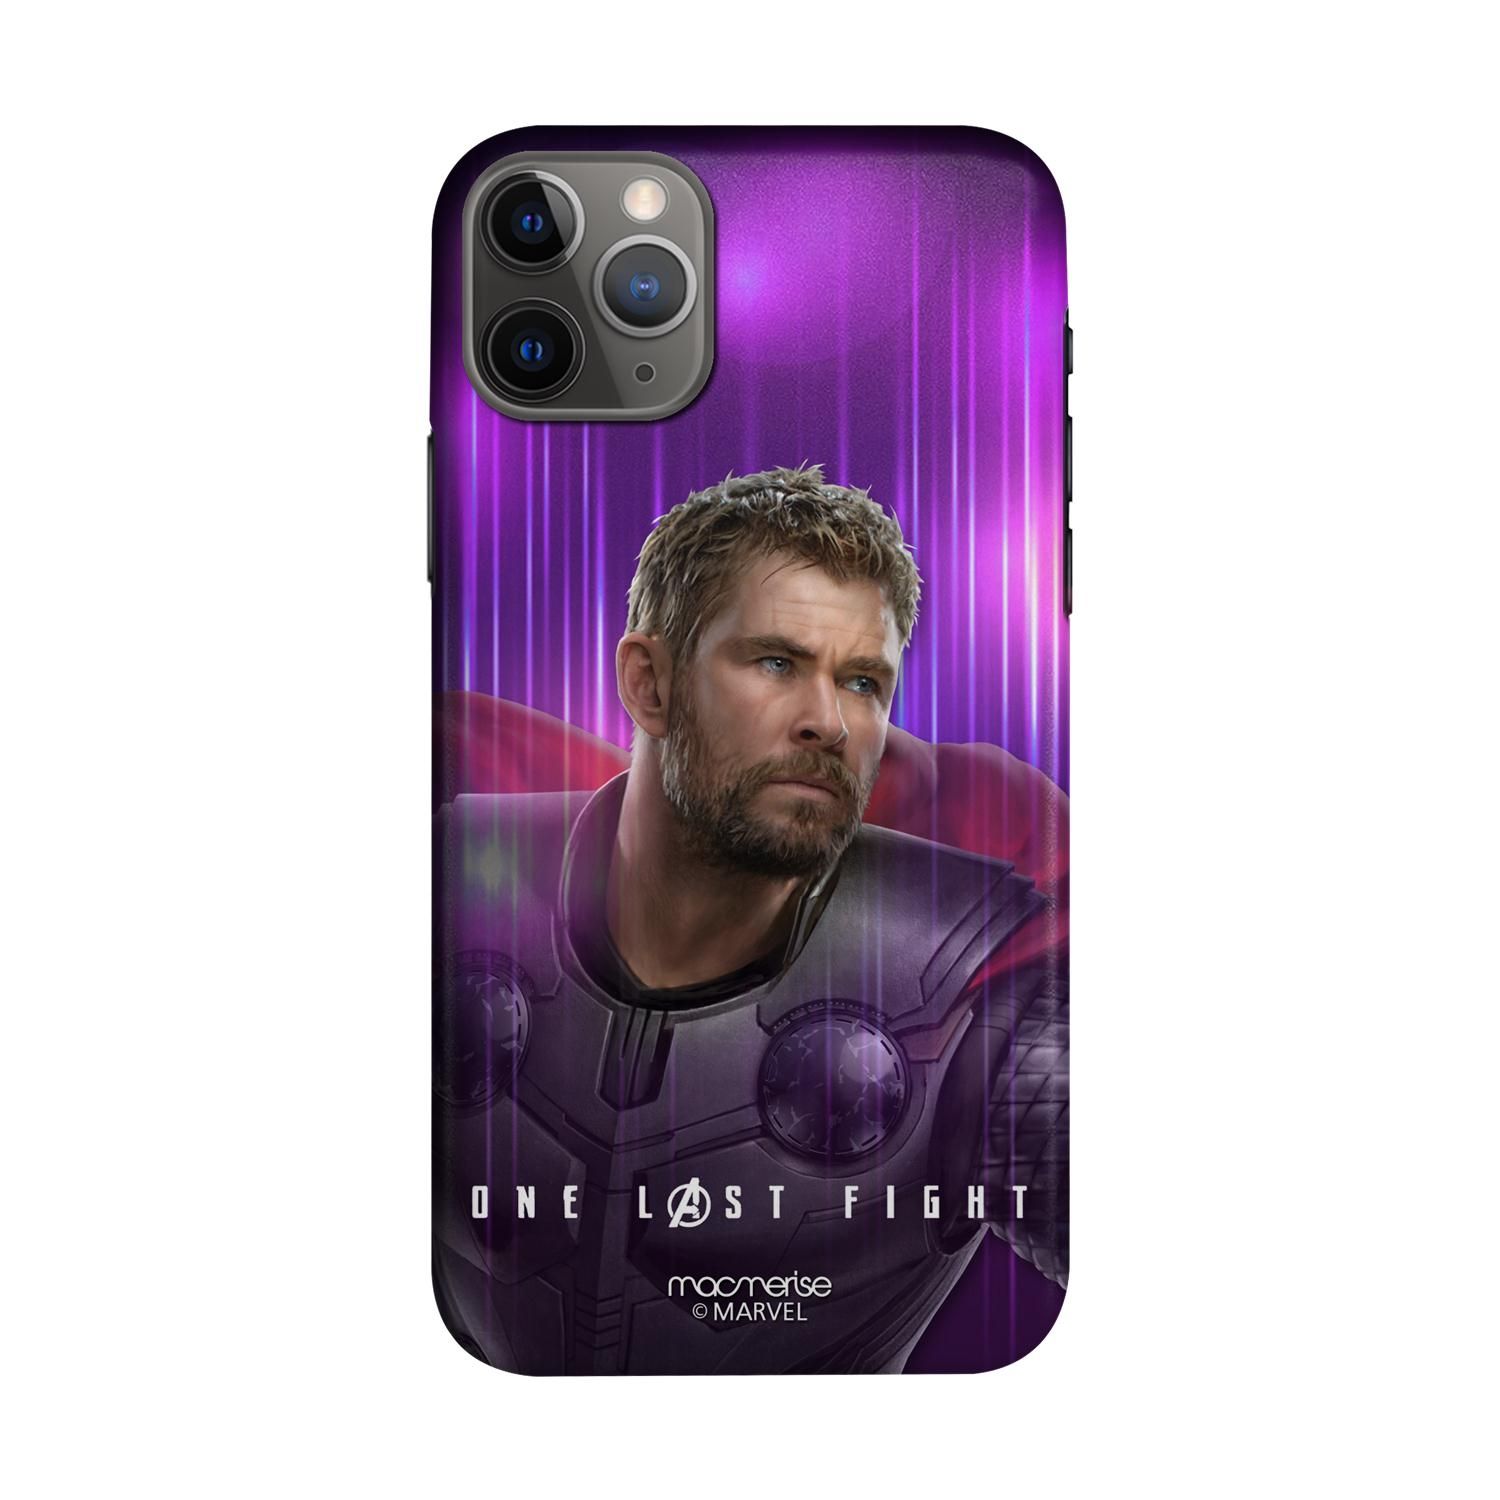 Buy One Last Fight - Sleek Phone Case for iPhone 11 Pro Max Online